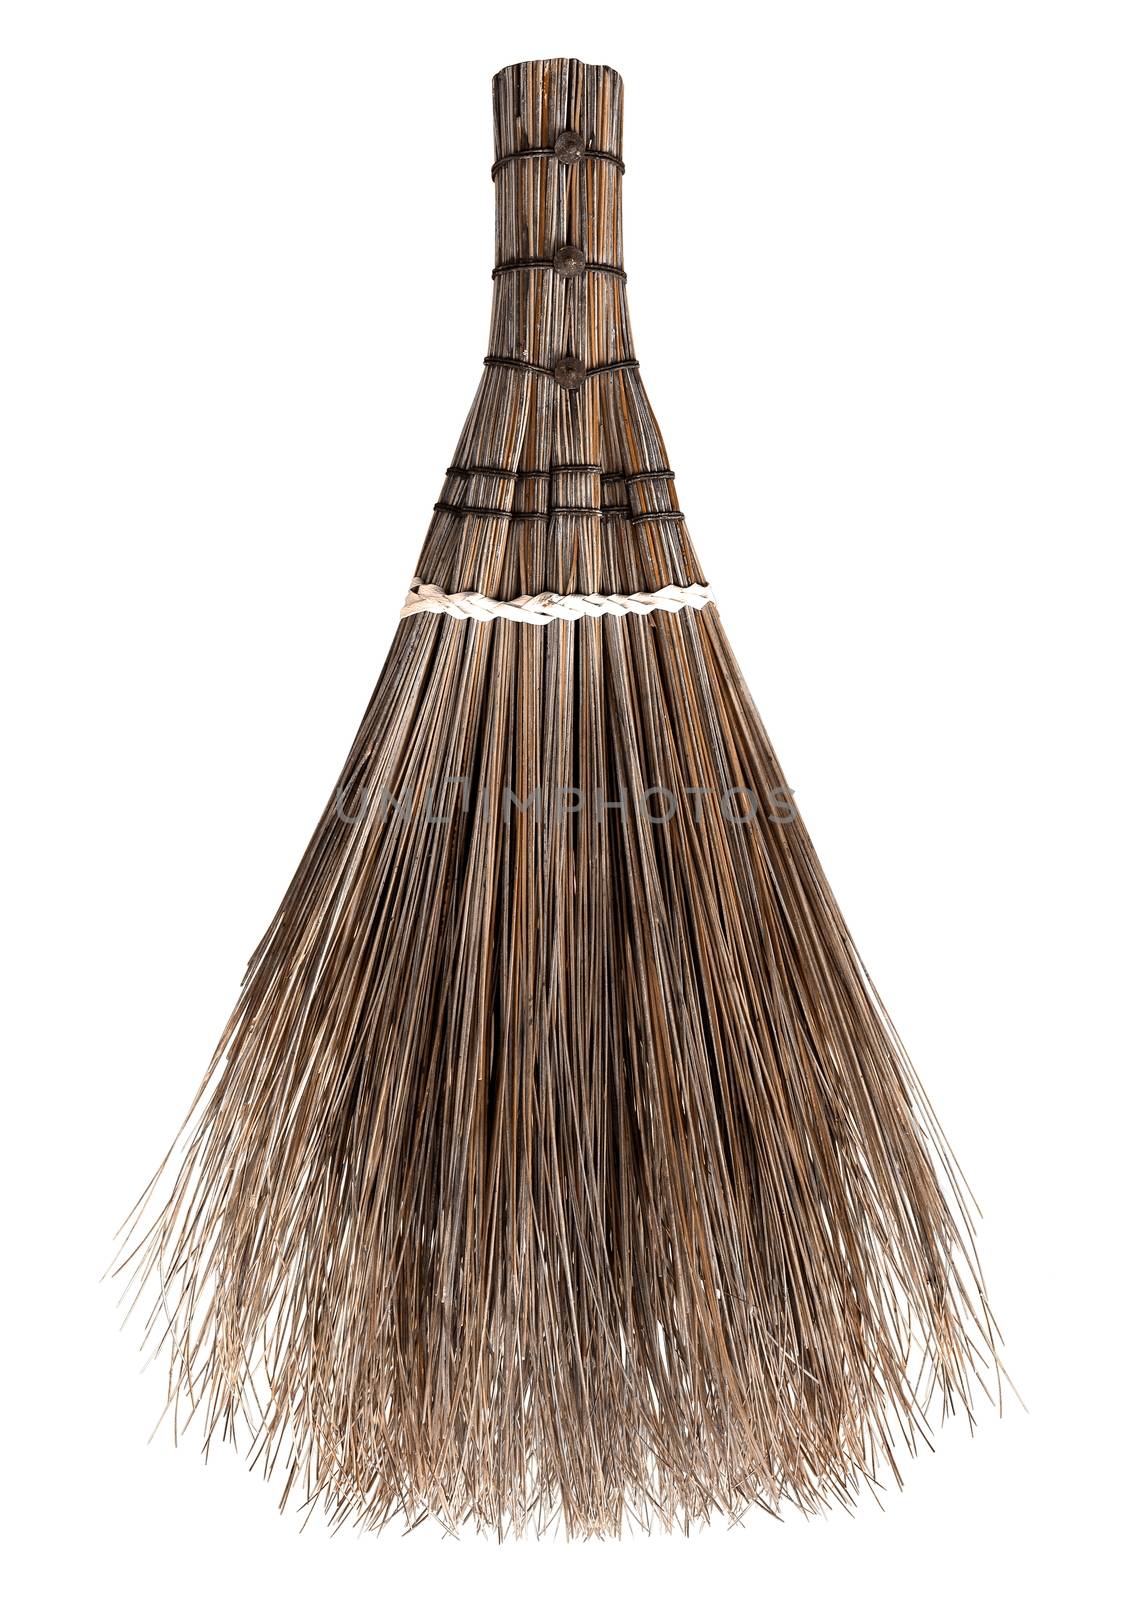 Broom and coconut palms grass for recycle bin and cleansing day, Broom, Witches isolated on white, witch's Broomstick by cgdeaw